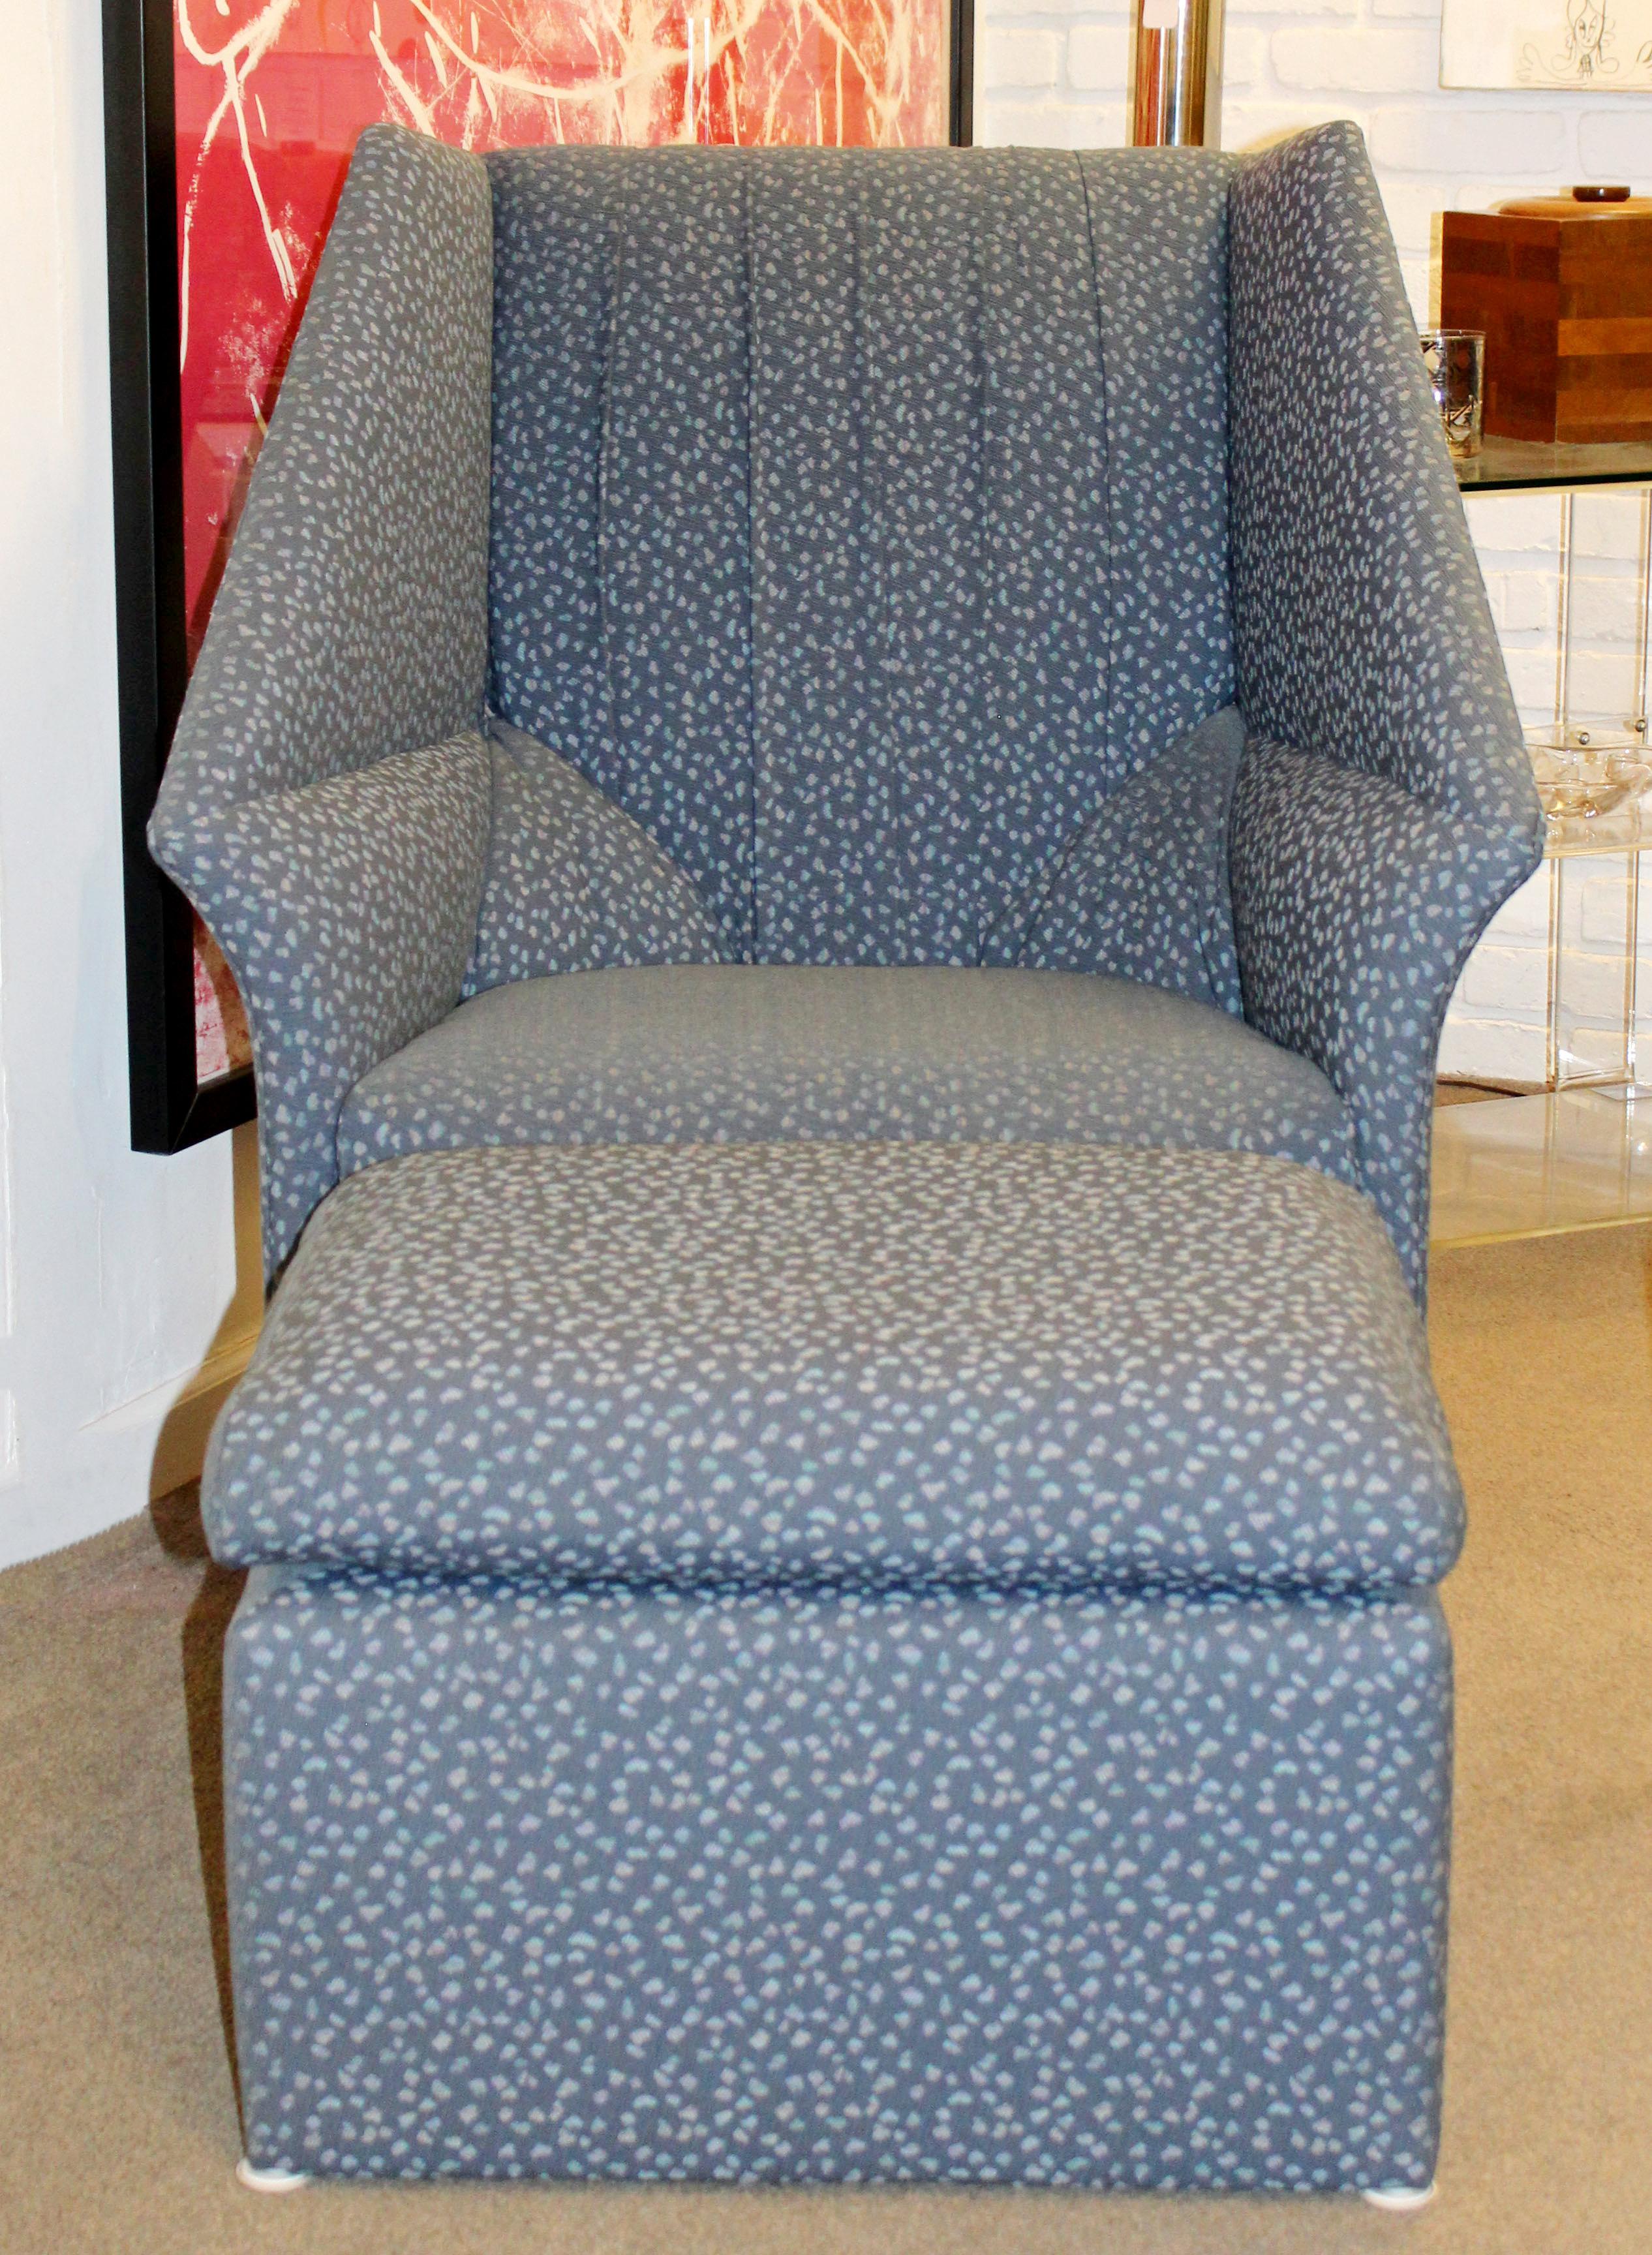 For your consideration is a marvelous, uniquely shaped lounge chair and ottoman, by John Saladino for Baker Furniture, circa the 1980s. In excellent condition. The dimensions of the chair are 34